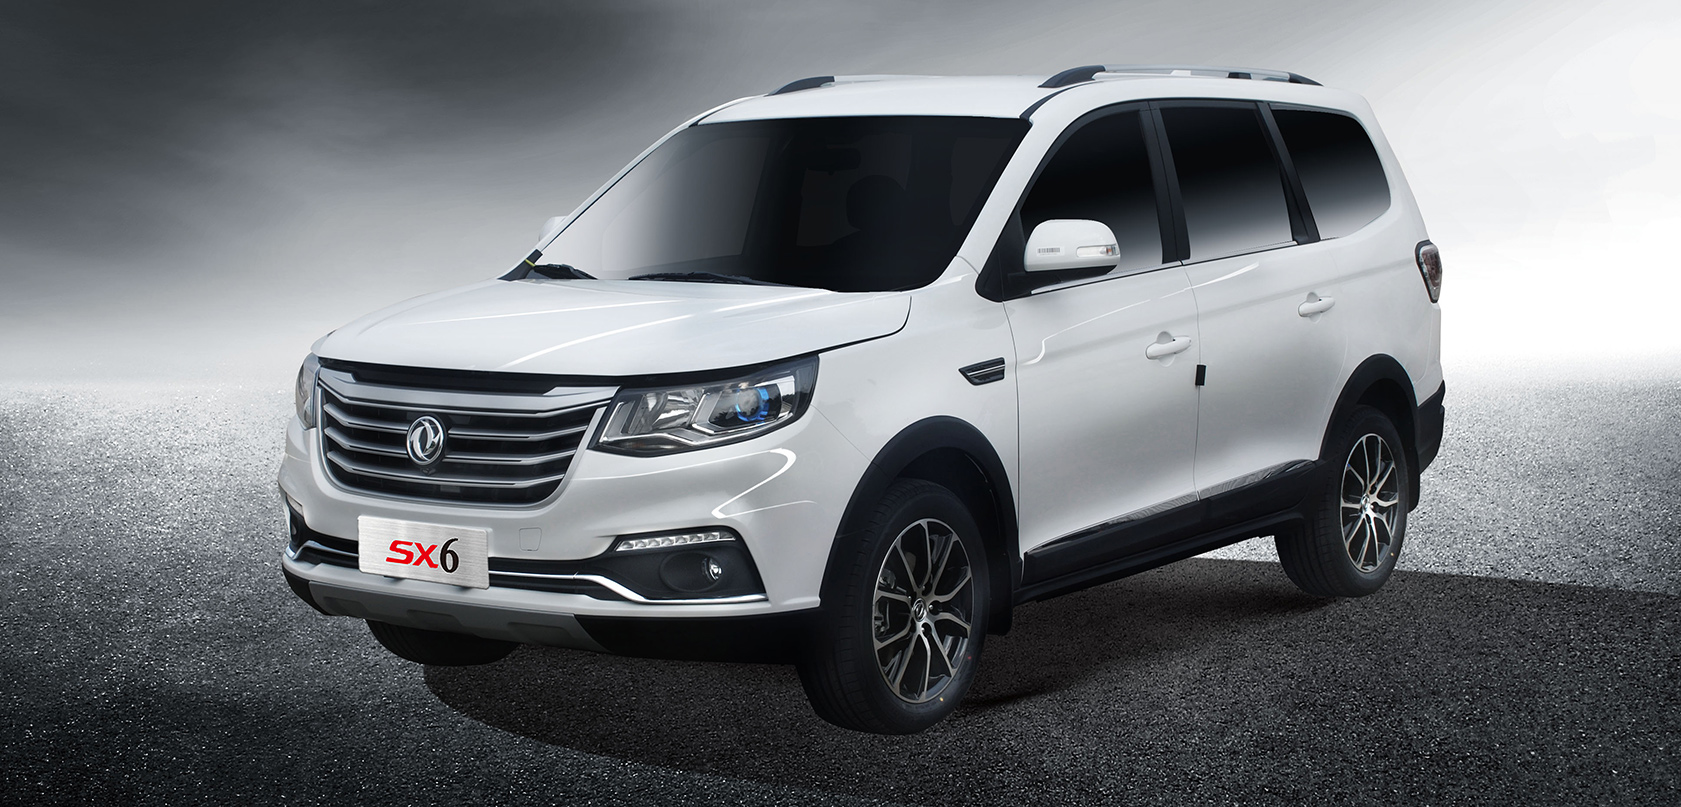 Forthing-SUV-SX6-akọkọ-in3